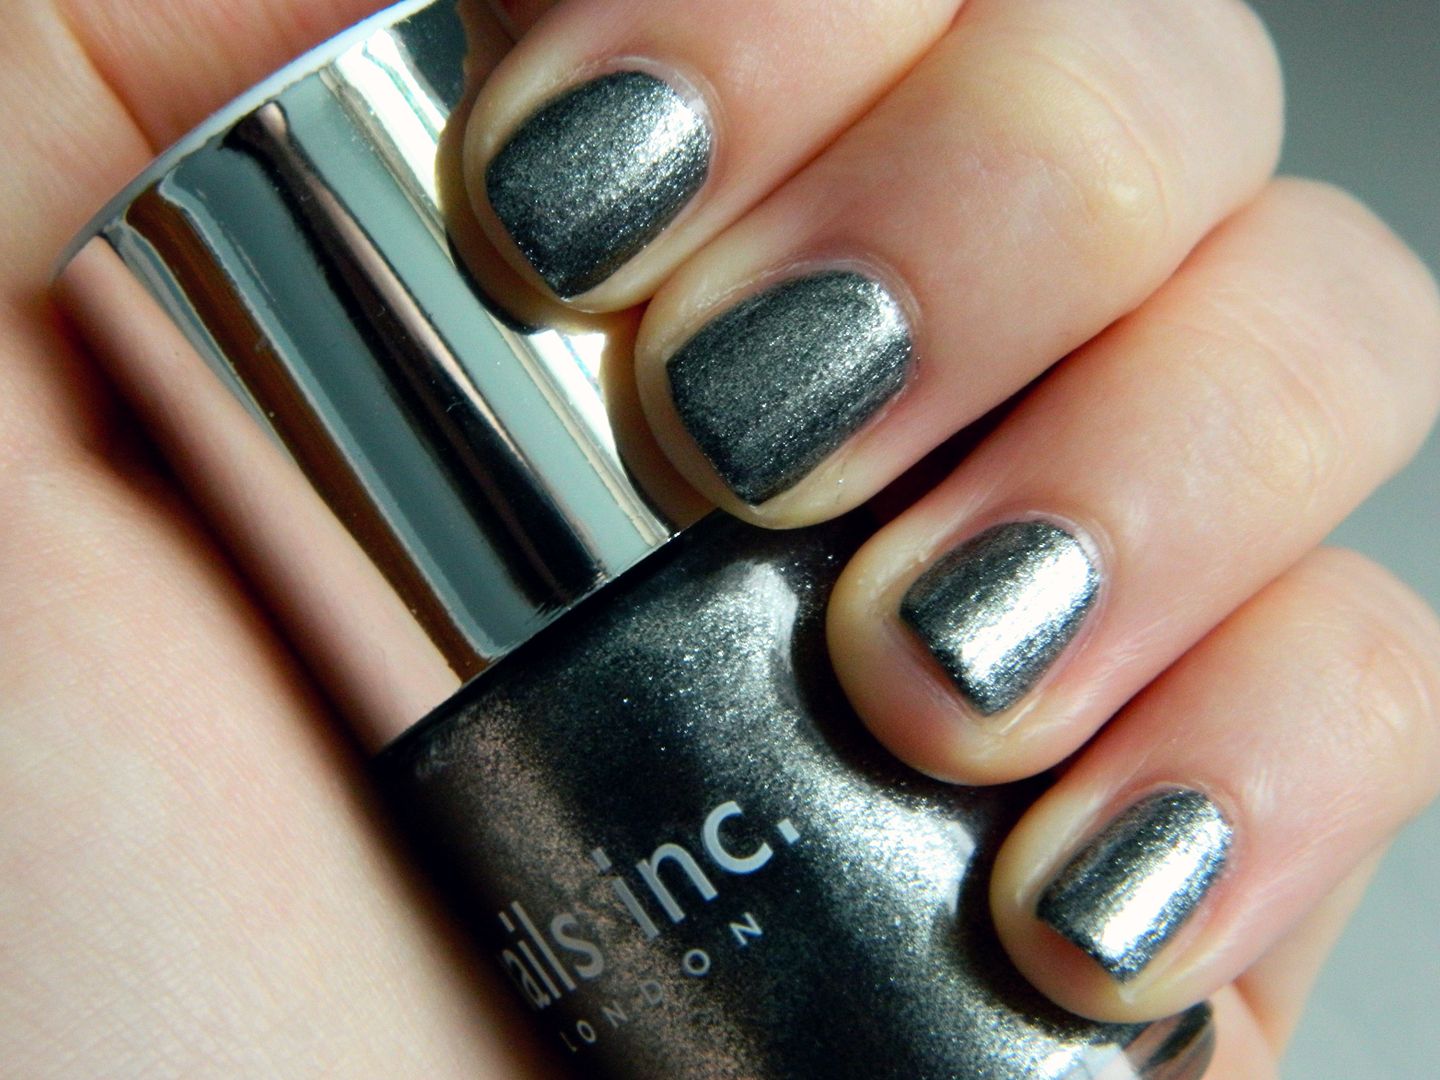 Nails Of The Day Nails Inc Chelsea Manor Street Nail Polish Swatch Review Belle-amie